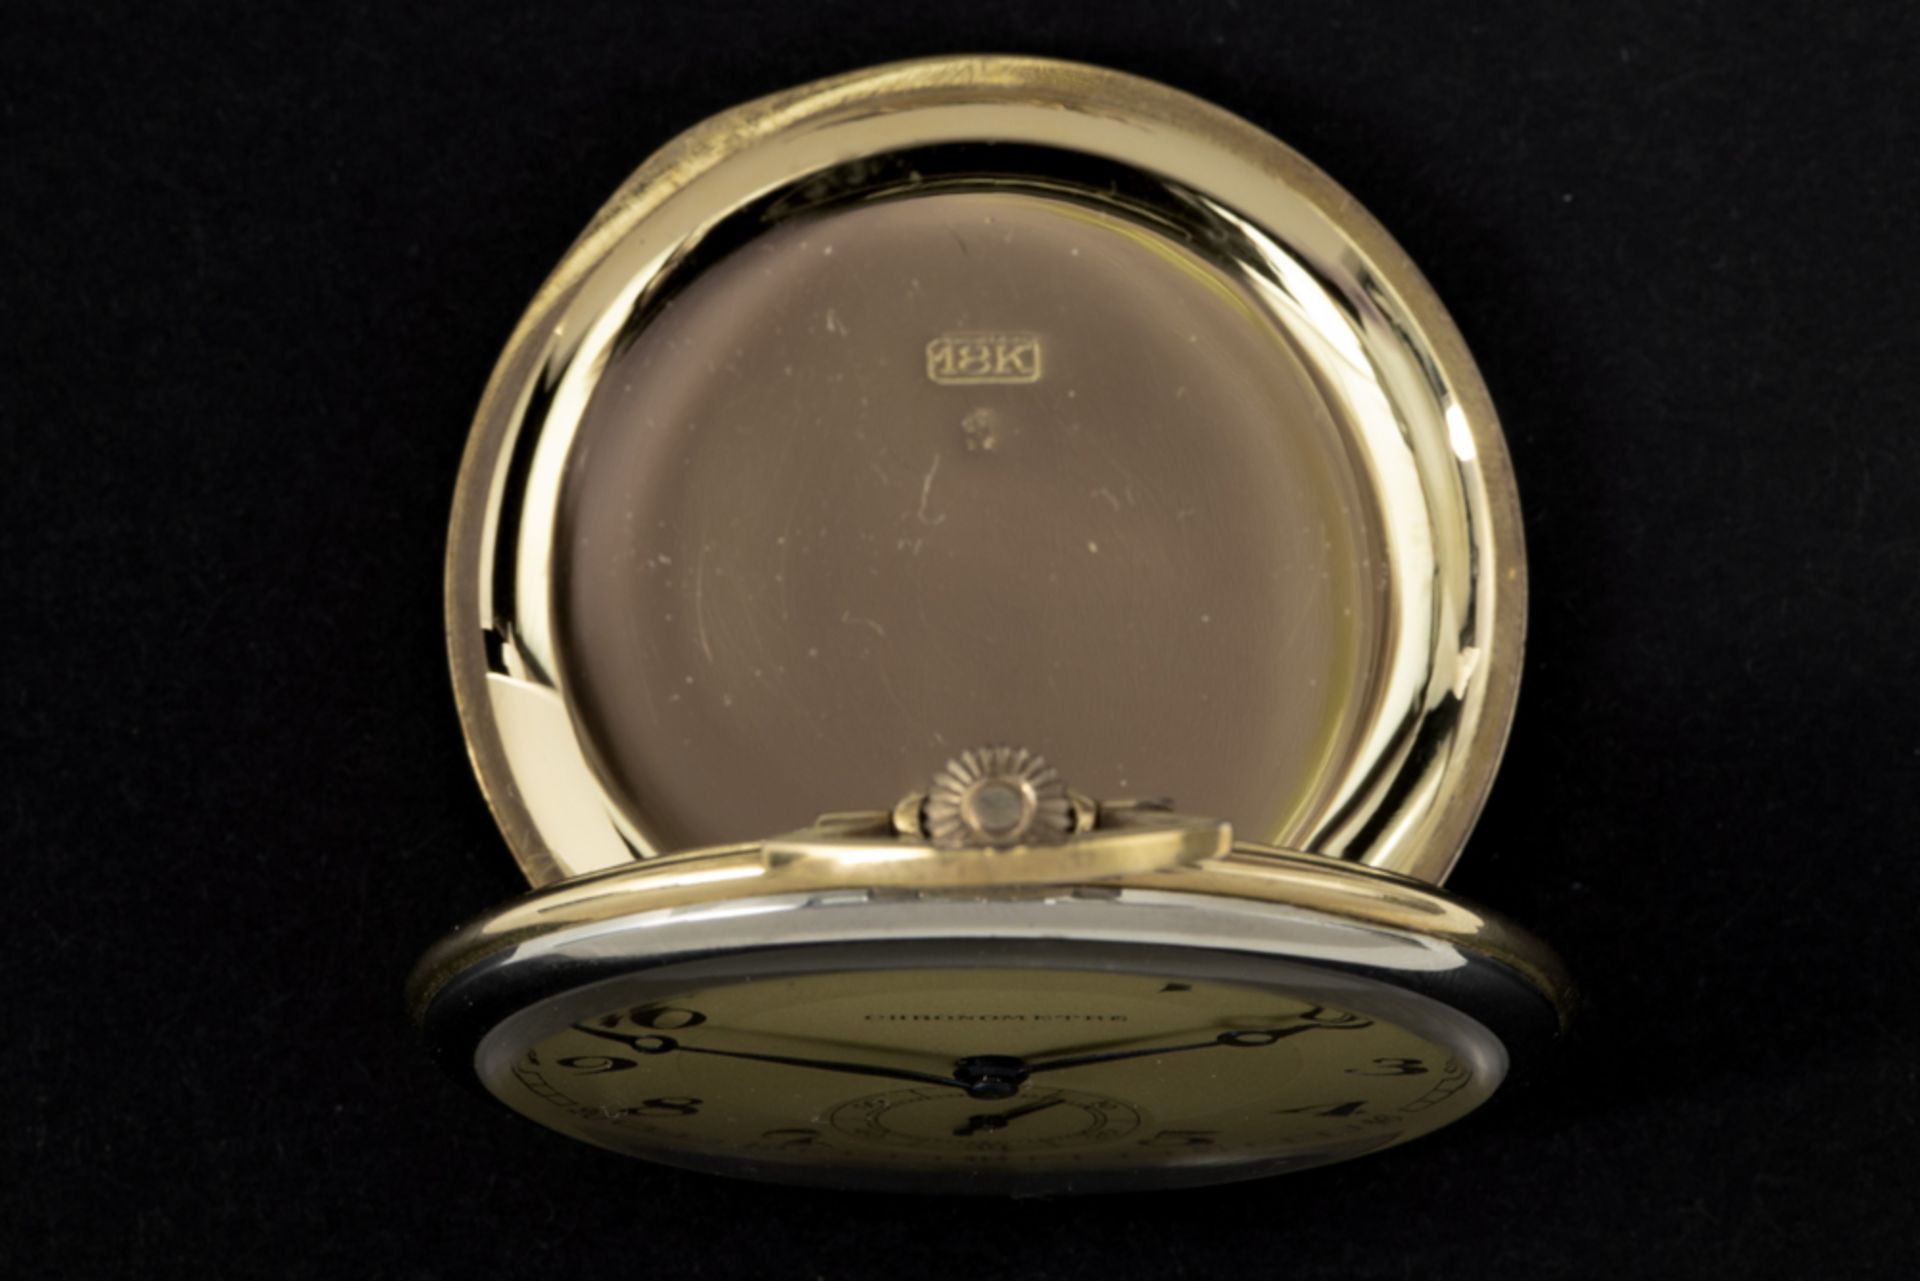 Chronomètre marked pocket watch with its case in yellow gold (18 carat) || CHRONOMETRE zakhorloge - Image 4 of 4